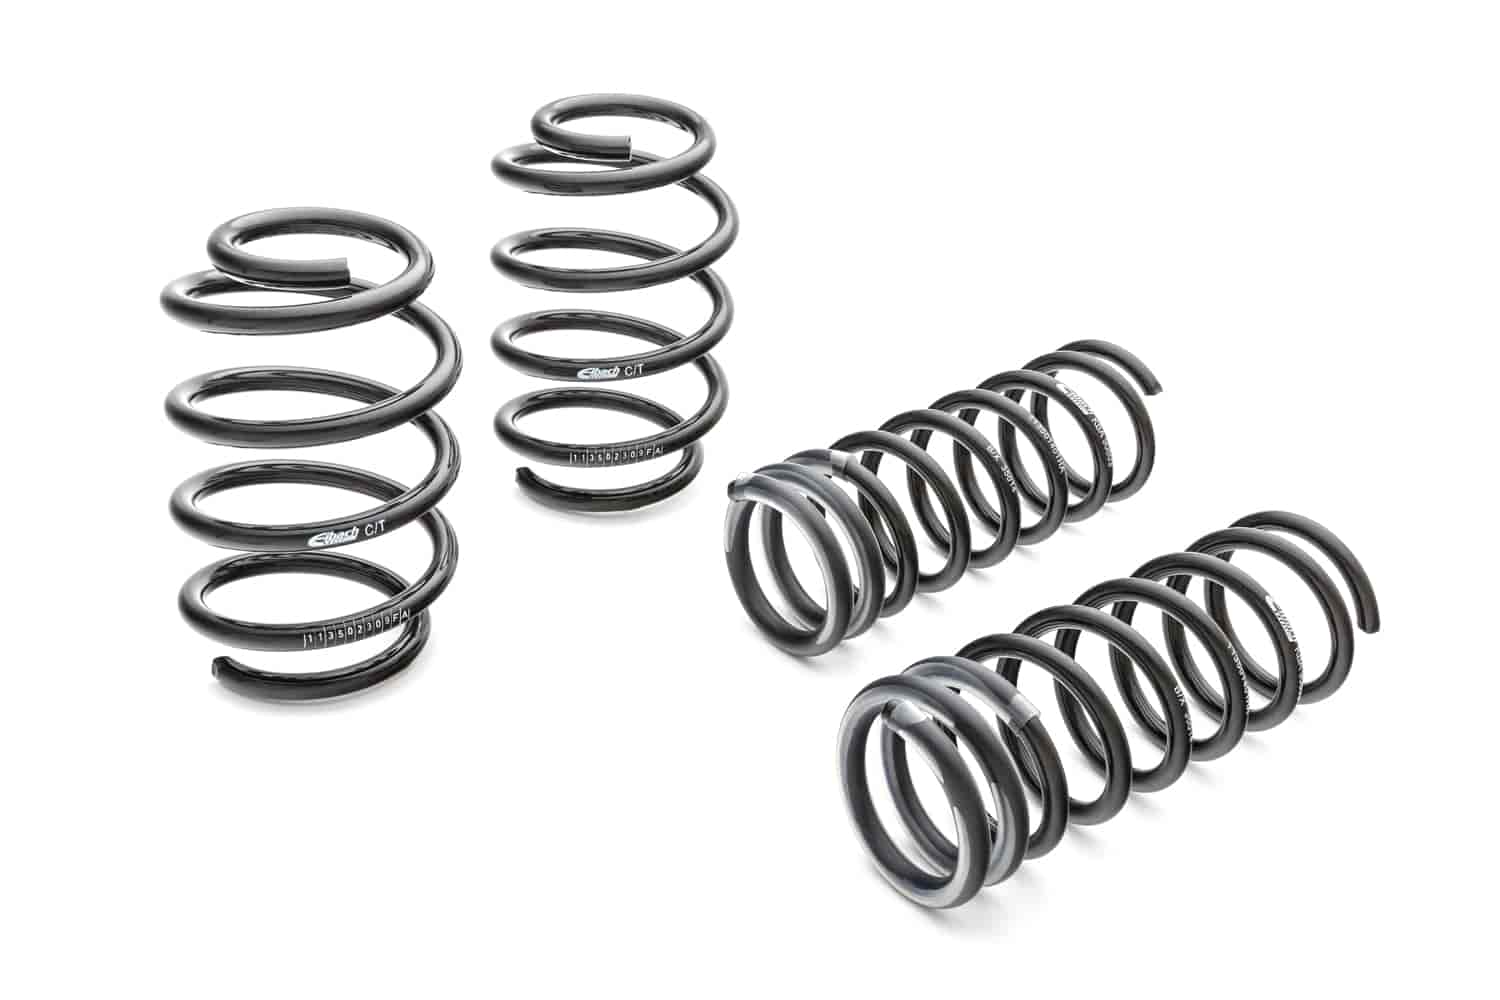 38131.520 Pro-SUV Lowering Springs 2007-13 Avalanche - 3.0